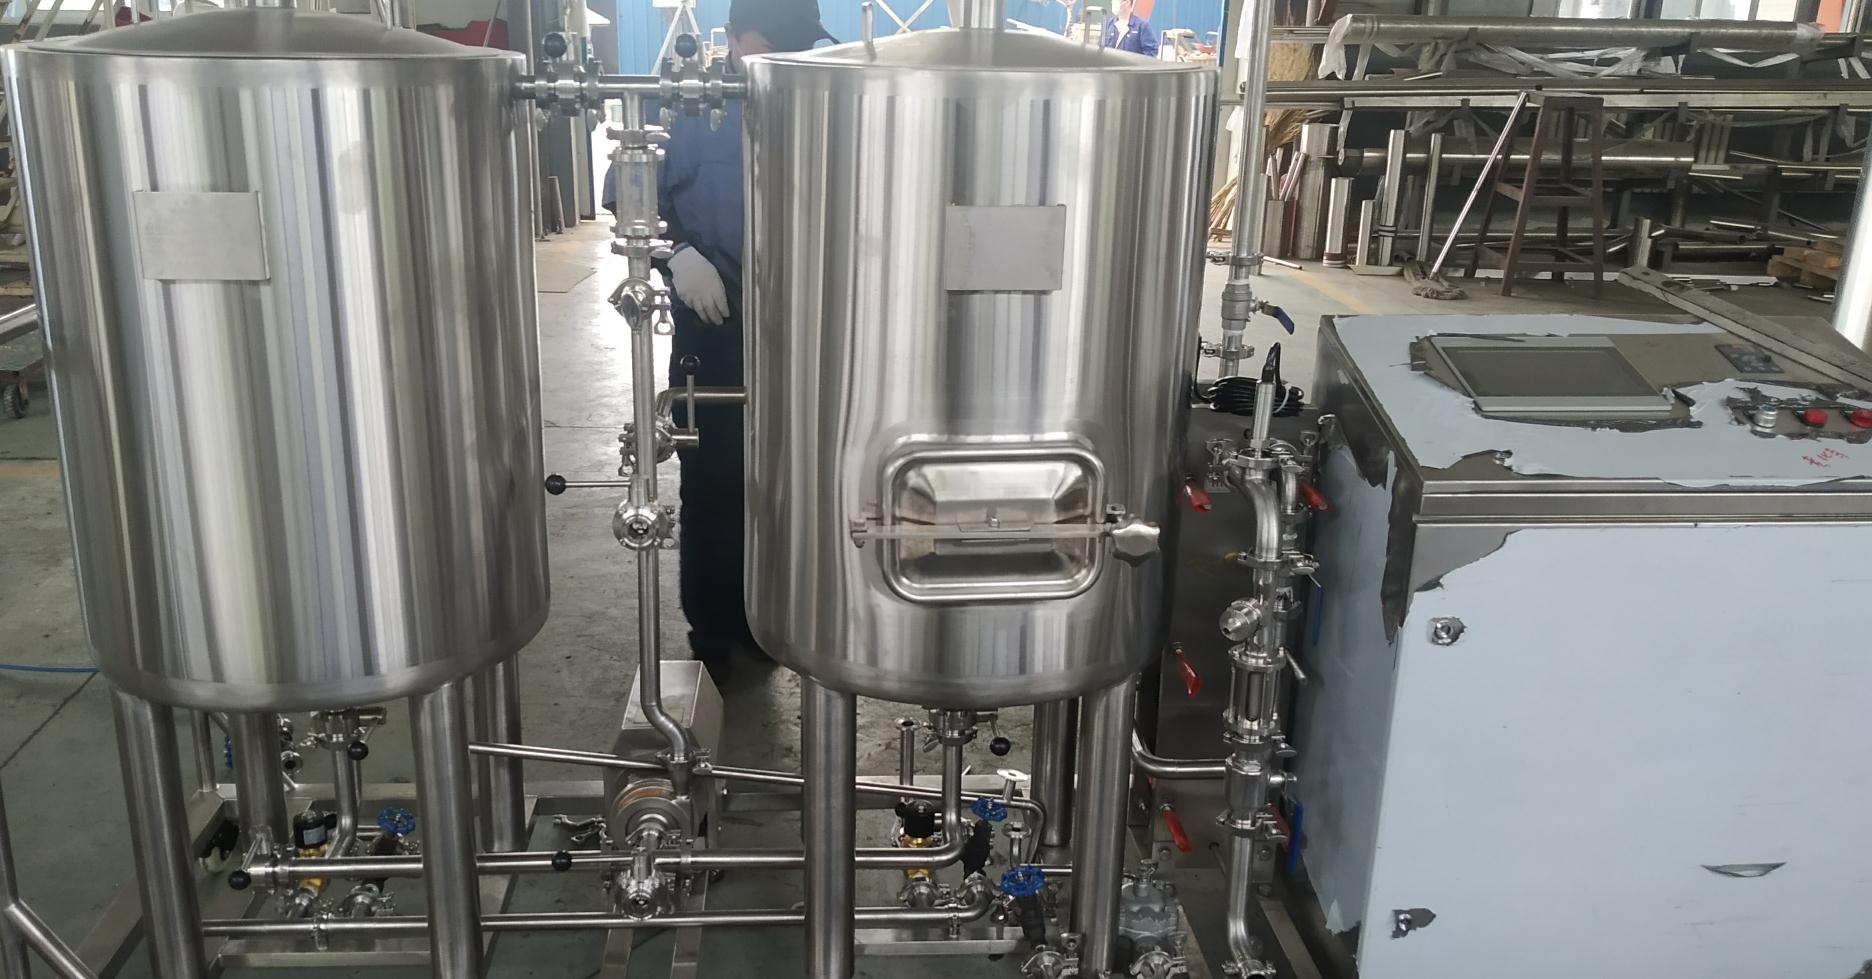 Chinese manufacturer professional microbrewery beer brewing equipment of stainless steel to Poland 2020 W1